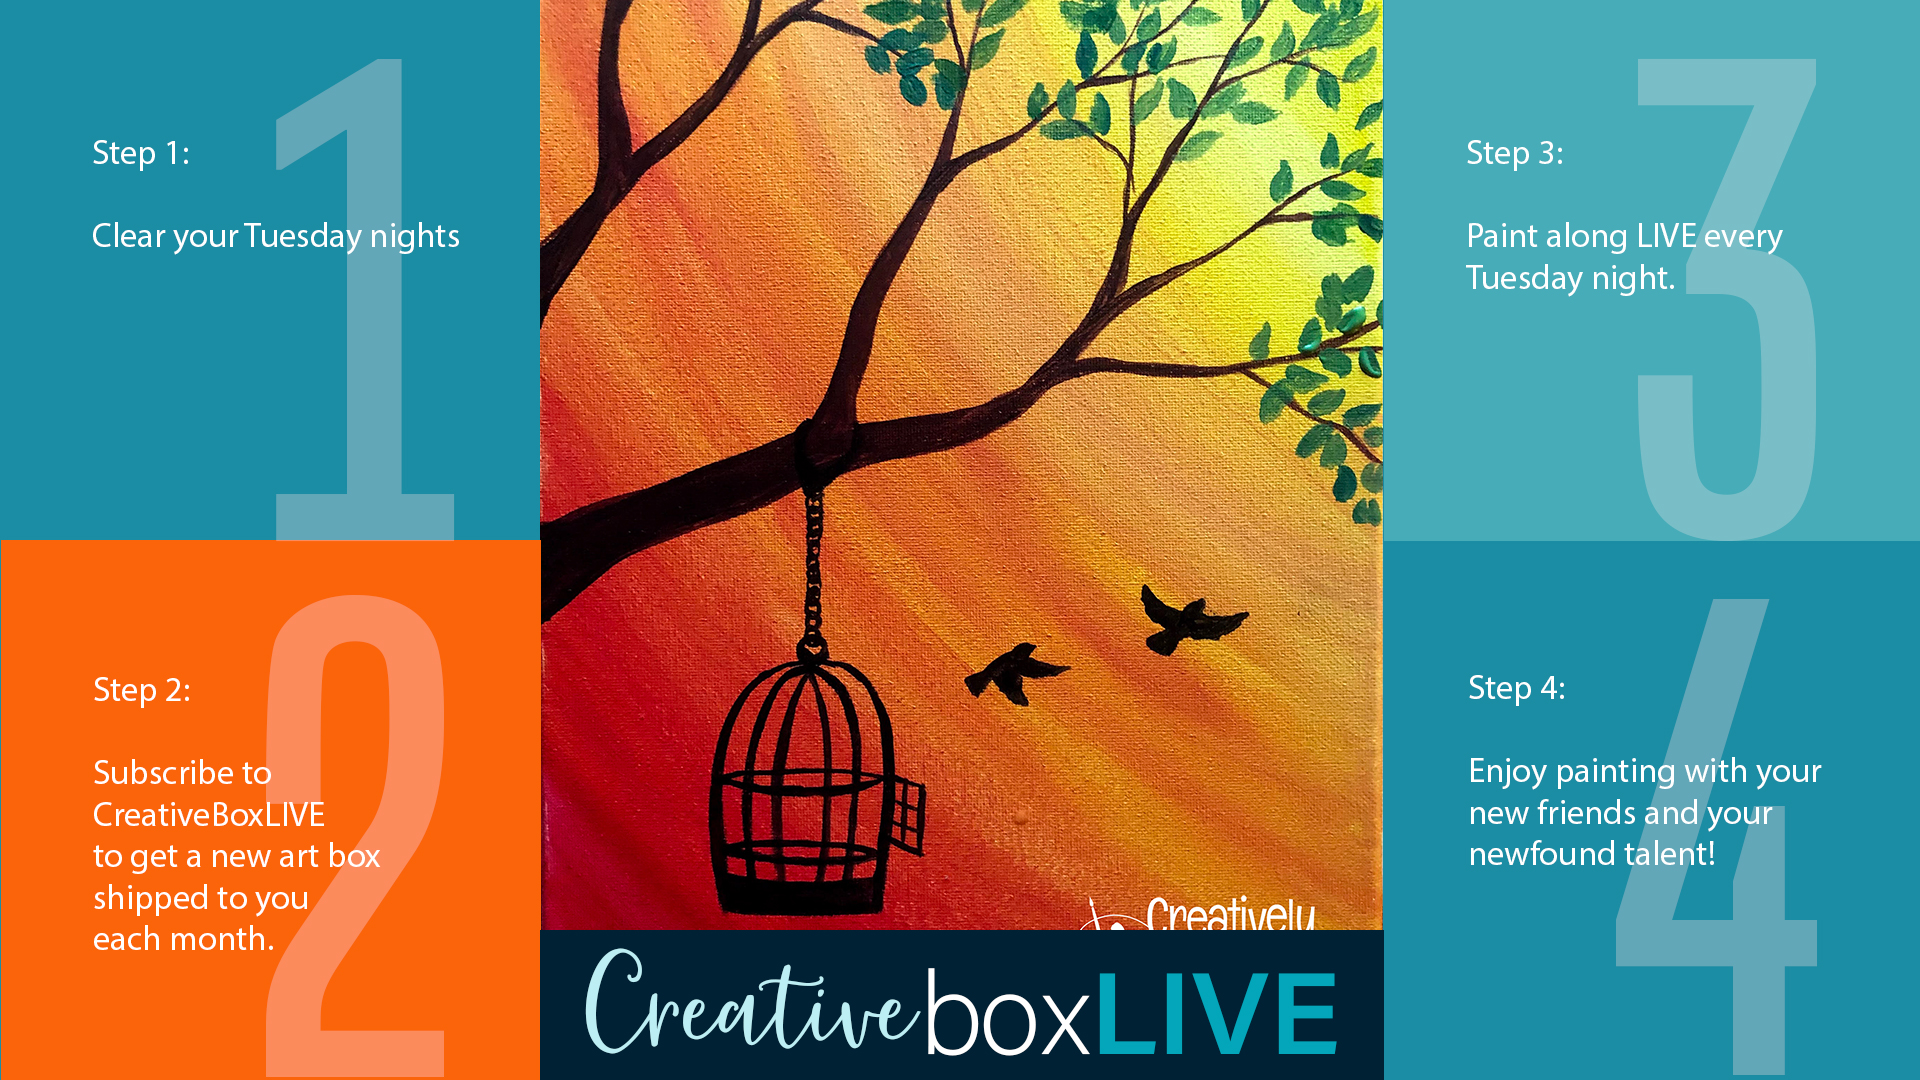 Free Birds CBL with CreativeBoxLIVE from Creatively Uncorked http://creativelyuncorked.com/